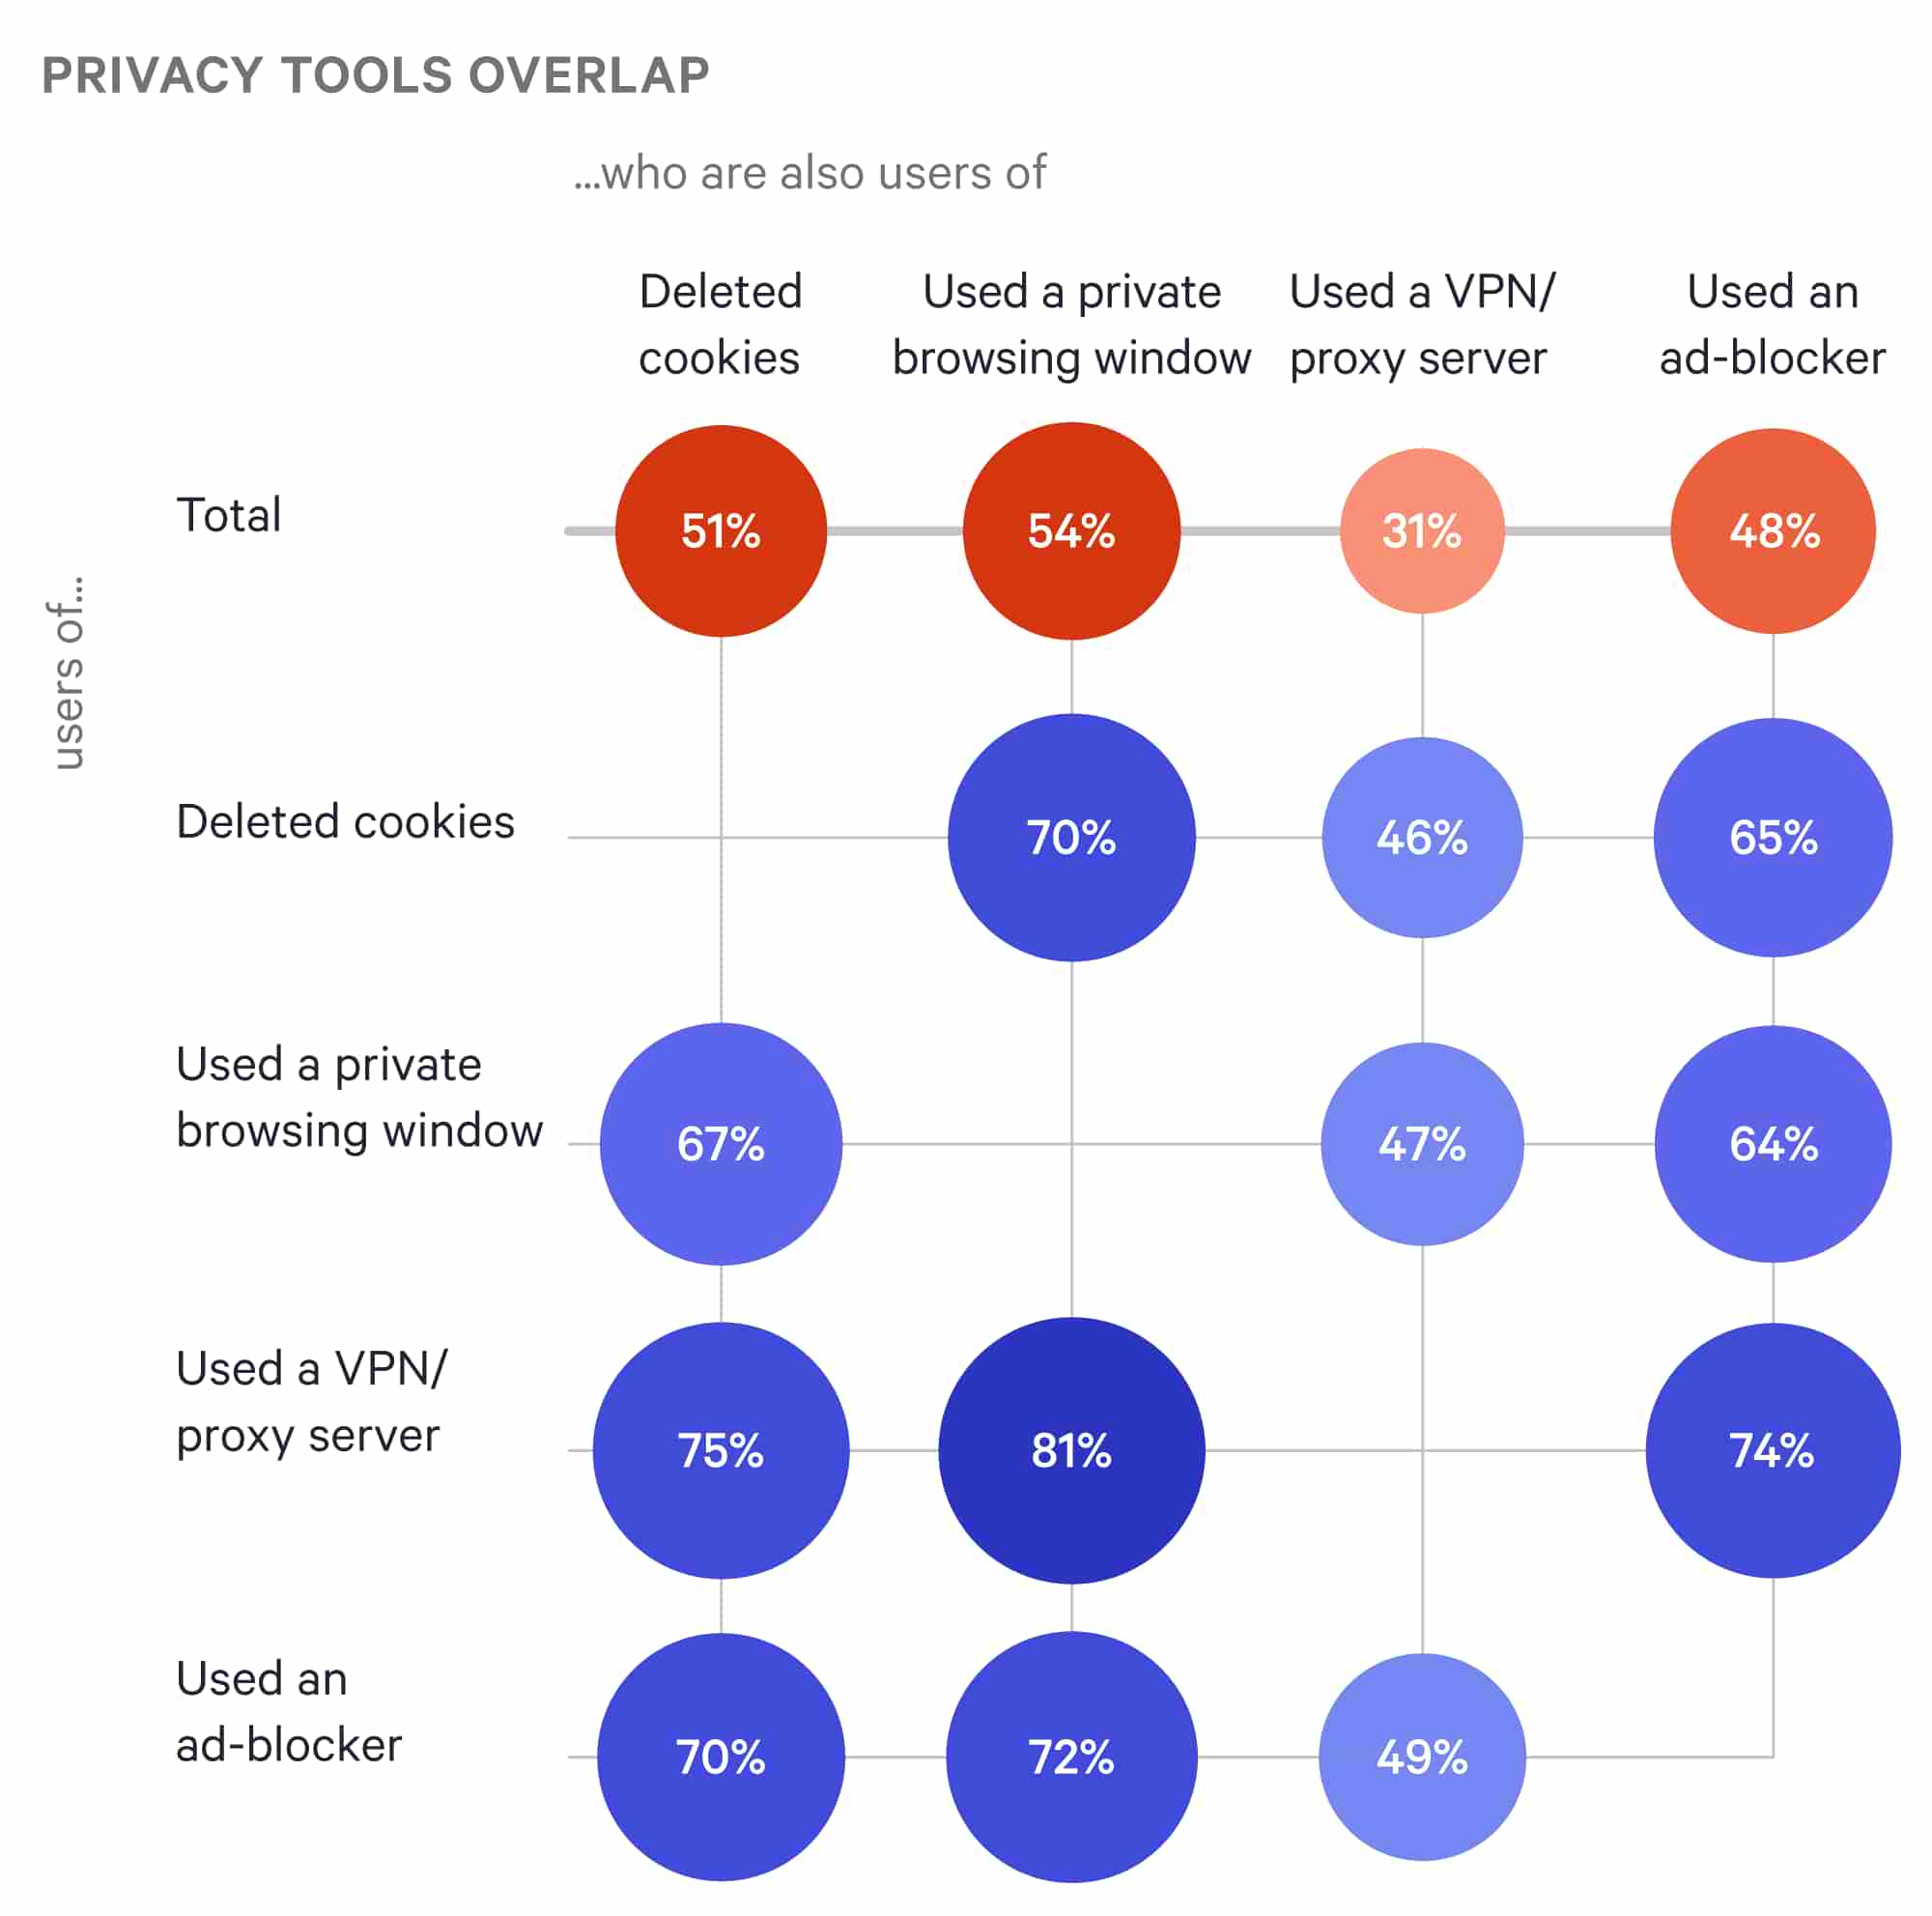 Chart showing the types of privacy tools used by internet users, and how popular they are to use alongside other privacy tools